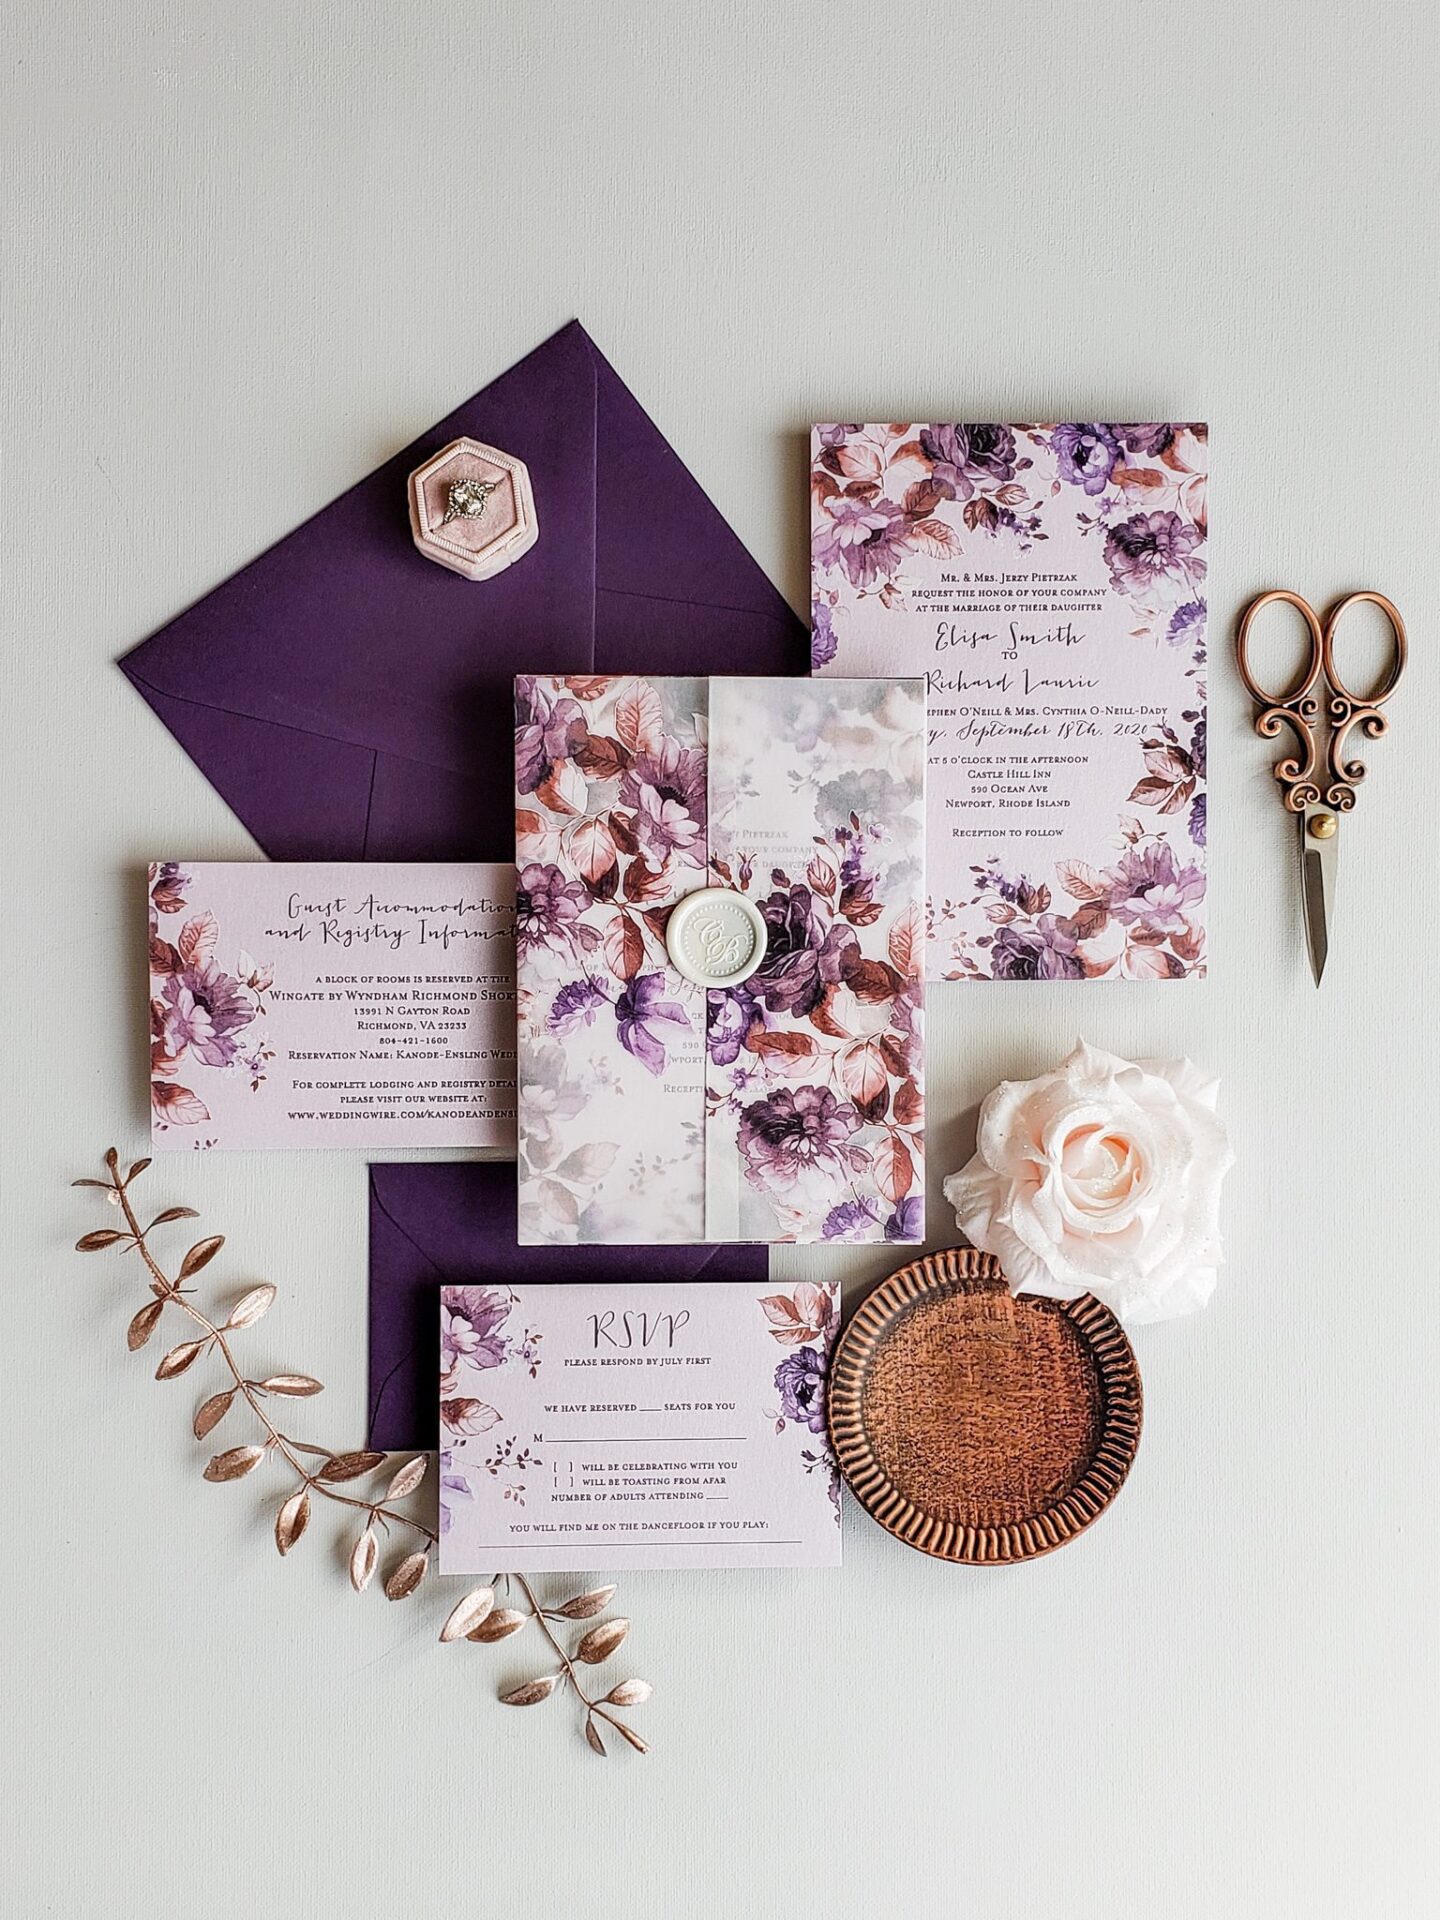 [vc_row][vc_column][vc_column_text]Purchase this listing to get a sample of our Covington wedding invitation suite.

The sample includes:

• 5.25